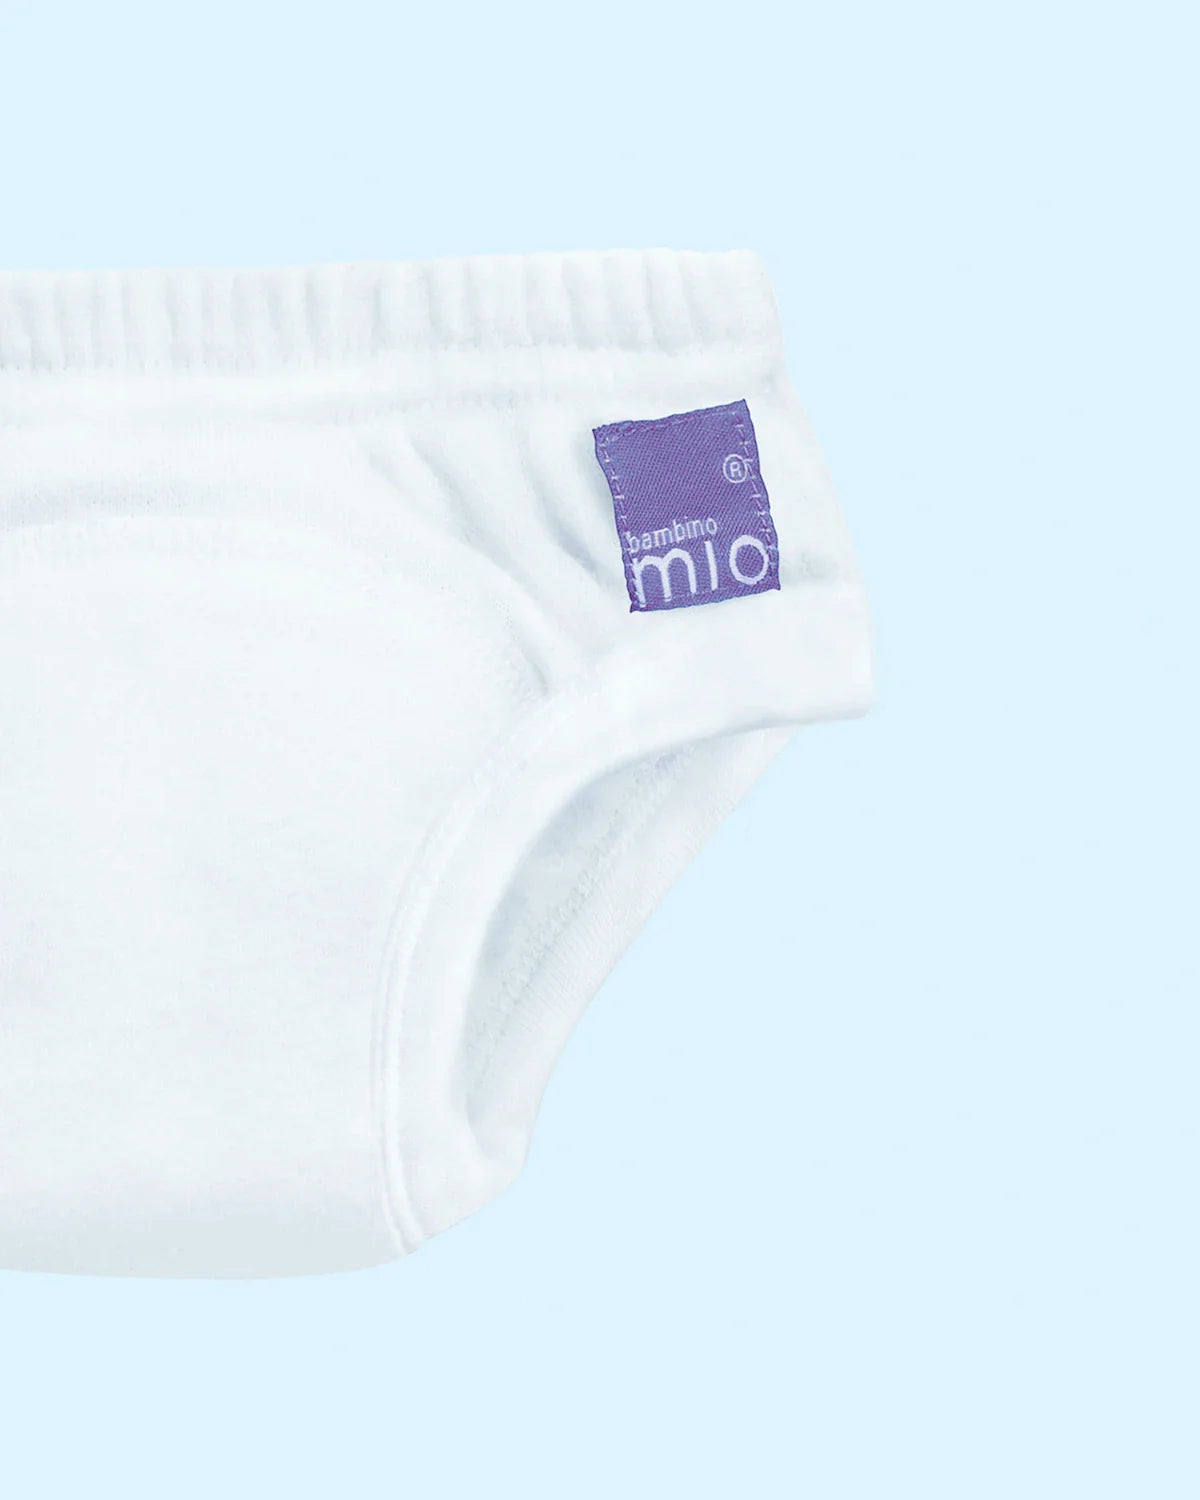 3-Pack Potty Training Pants for Toddlers